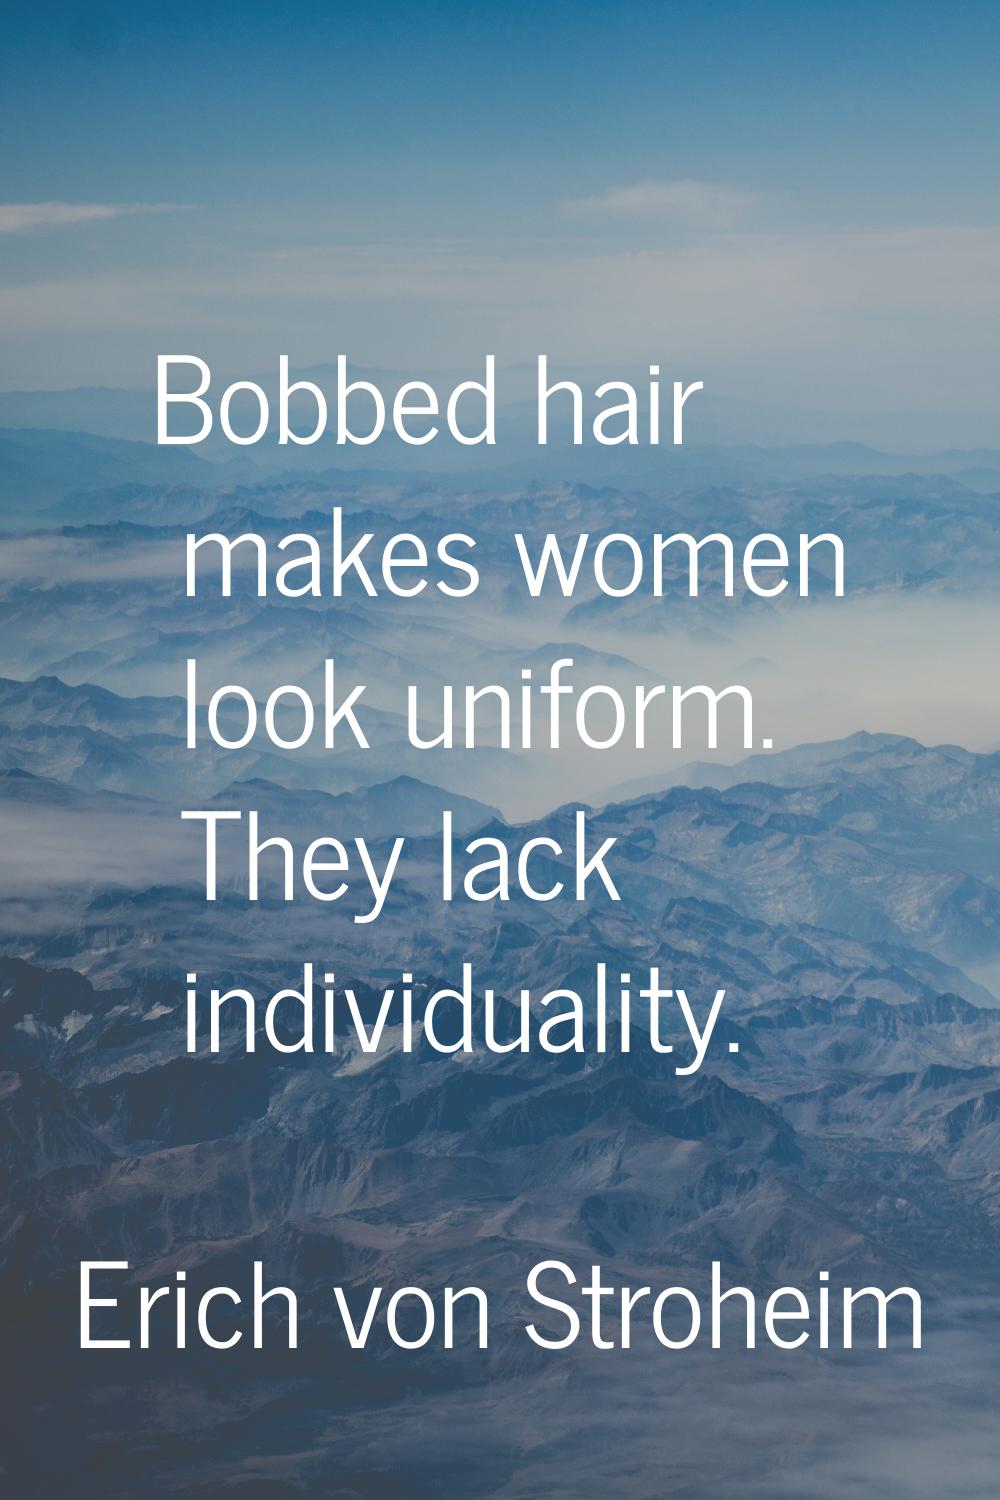 Bobbed hair makes women look uniform. They lack individuality.